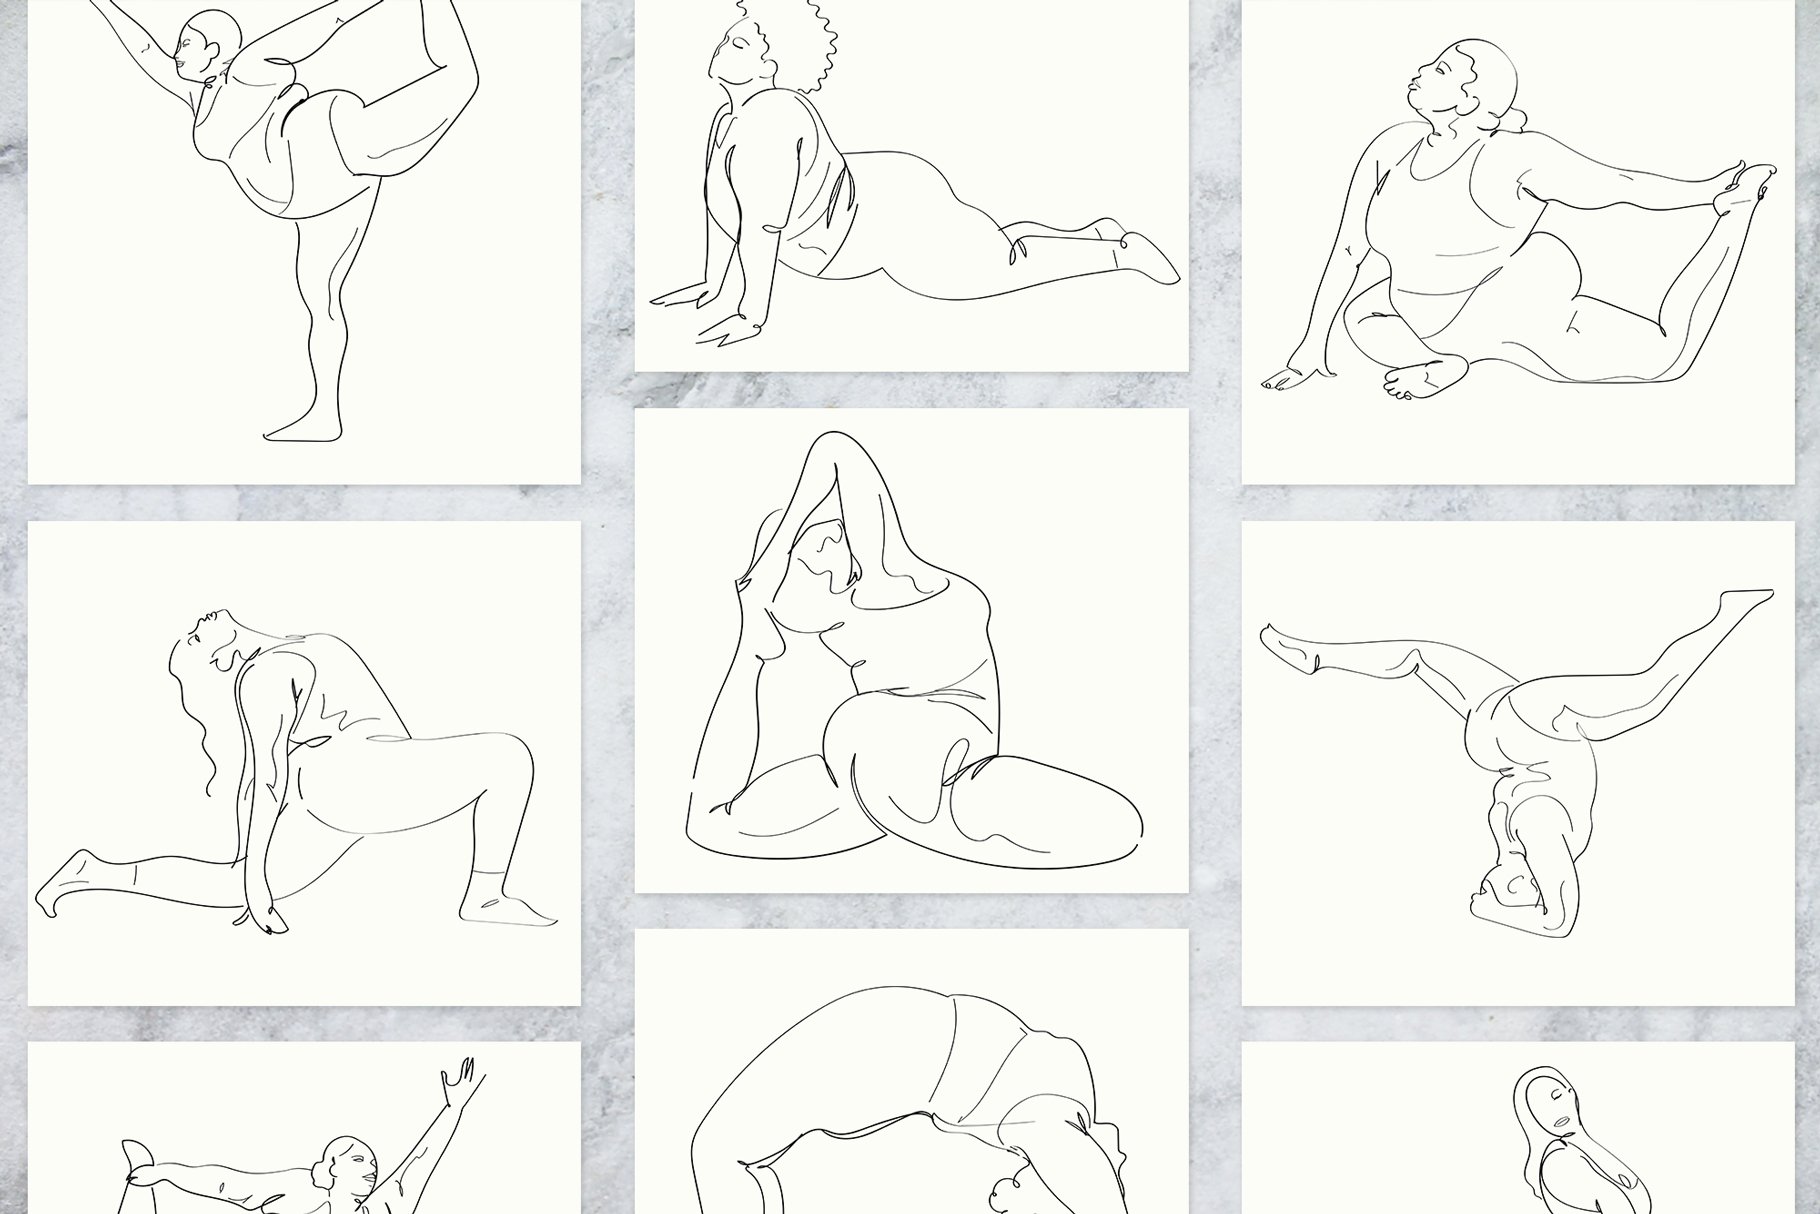 Curves Yoga Line Art and Illustration Package